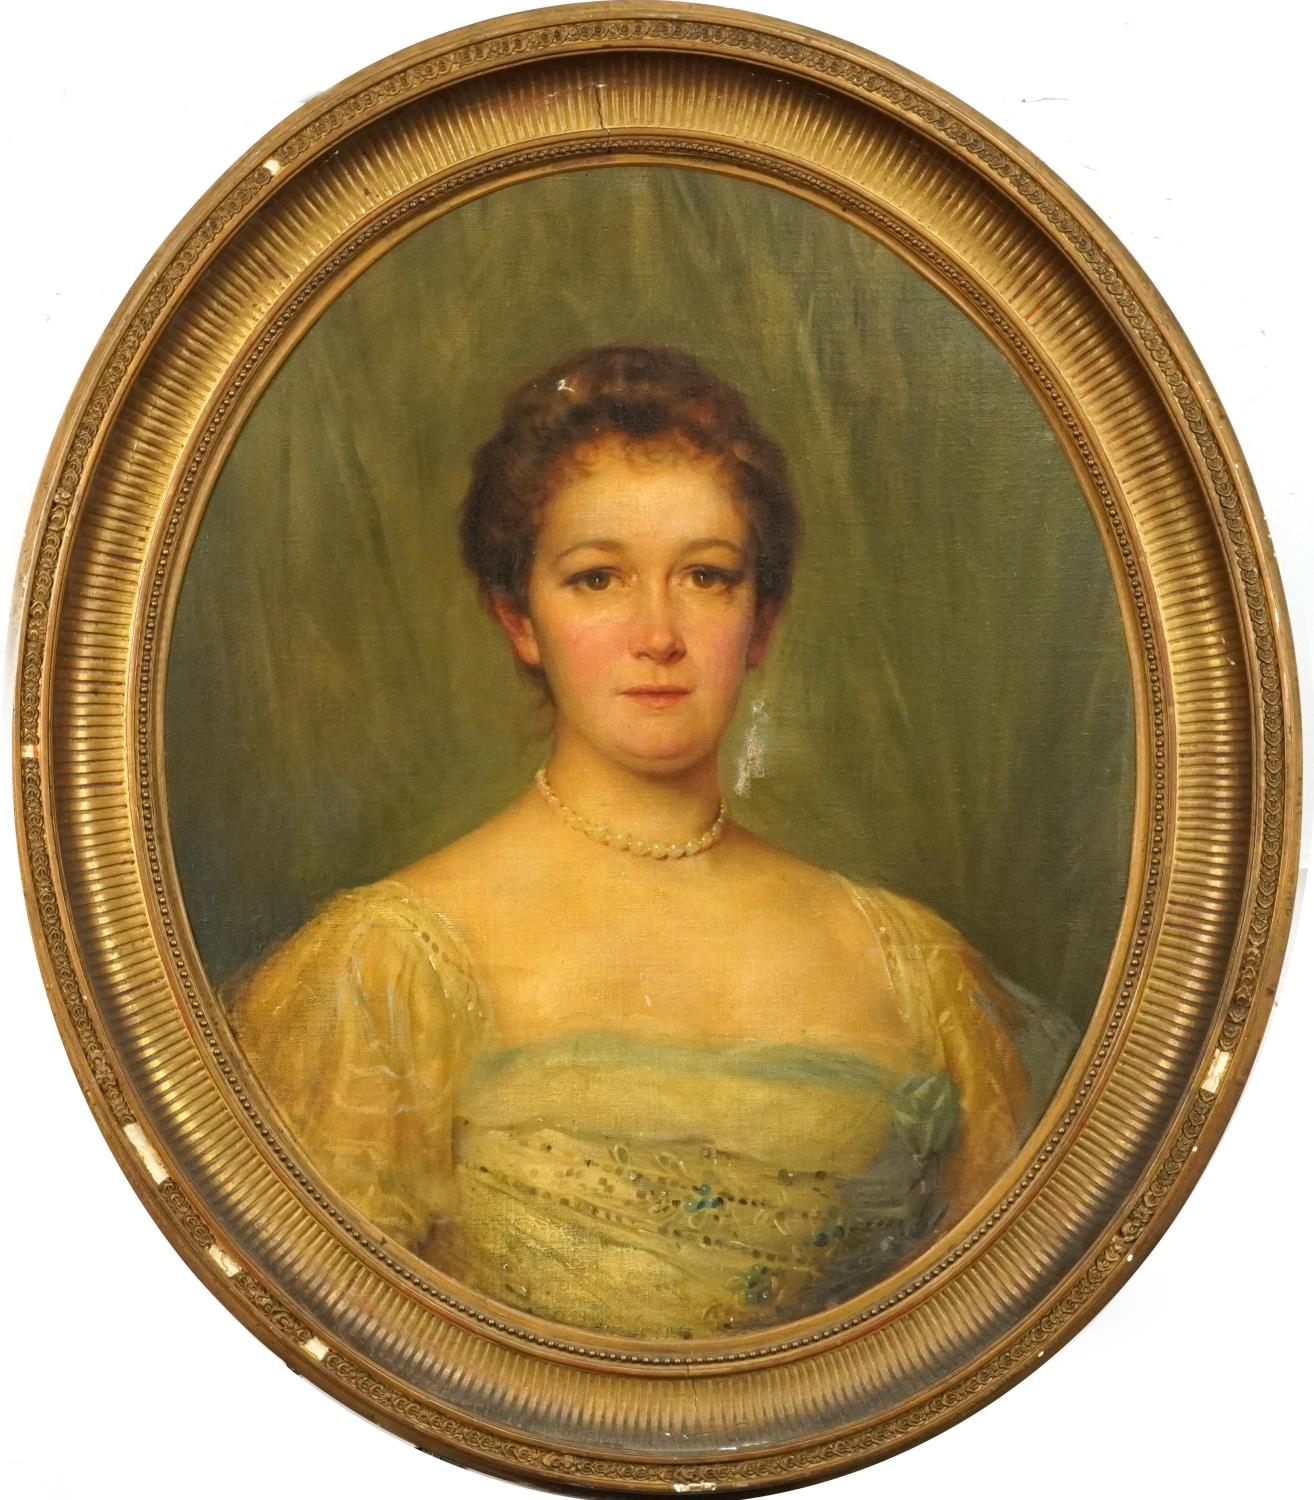 Head and shoulders portrait of a young female wearing a white dress and necklace, 19th century - Image 2 of 5